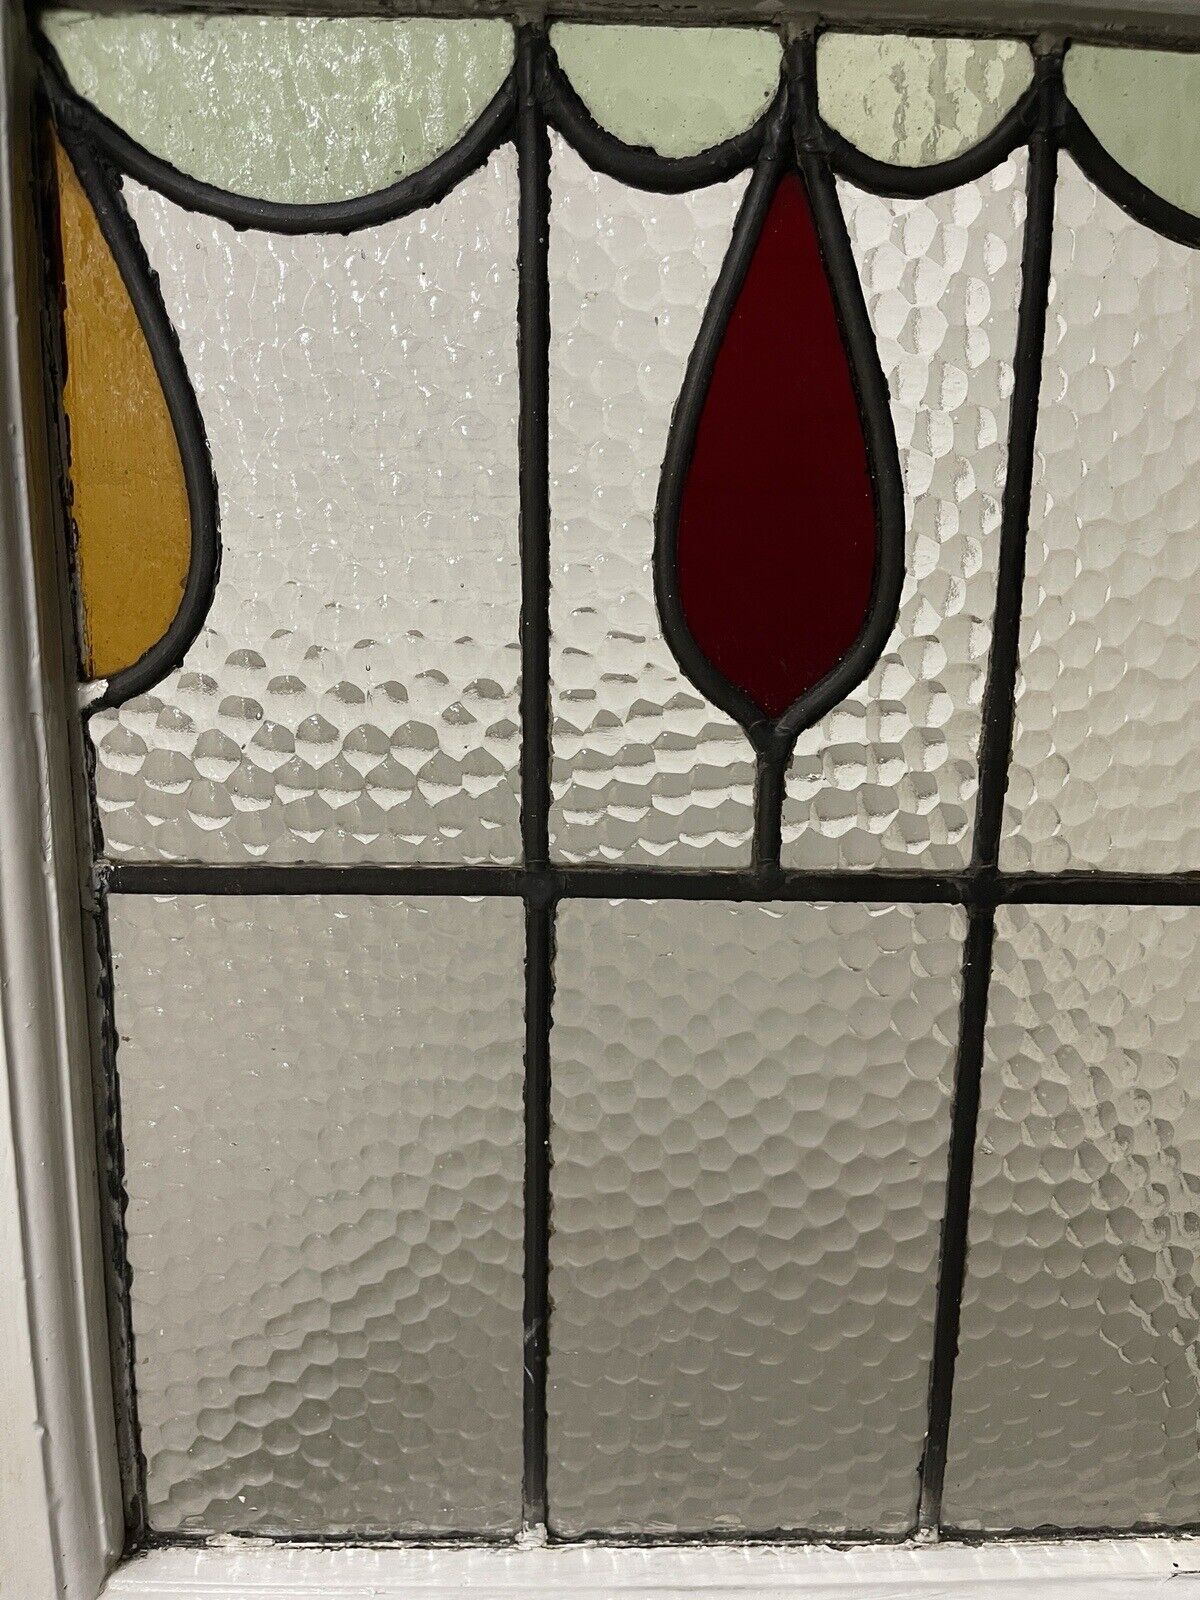 Reclaimed Leaded Light Stained Glass Window Panel 430 x 505mm